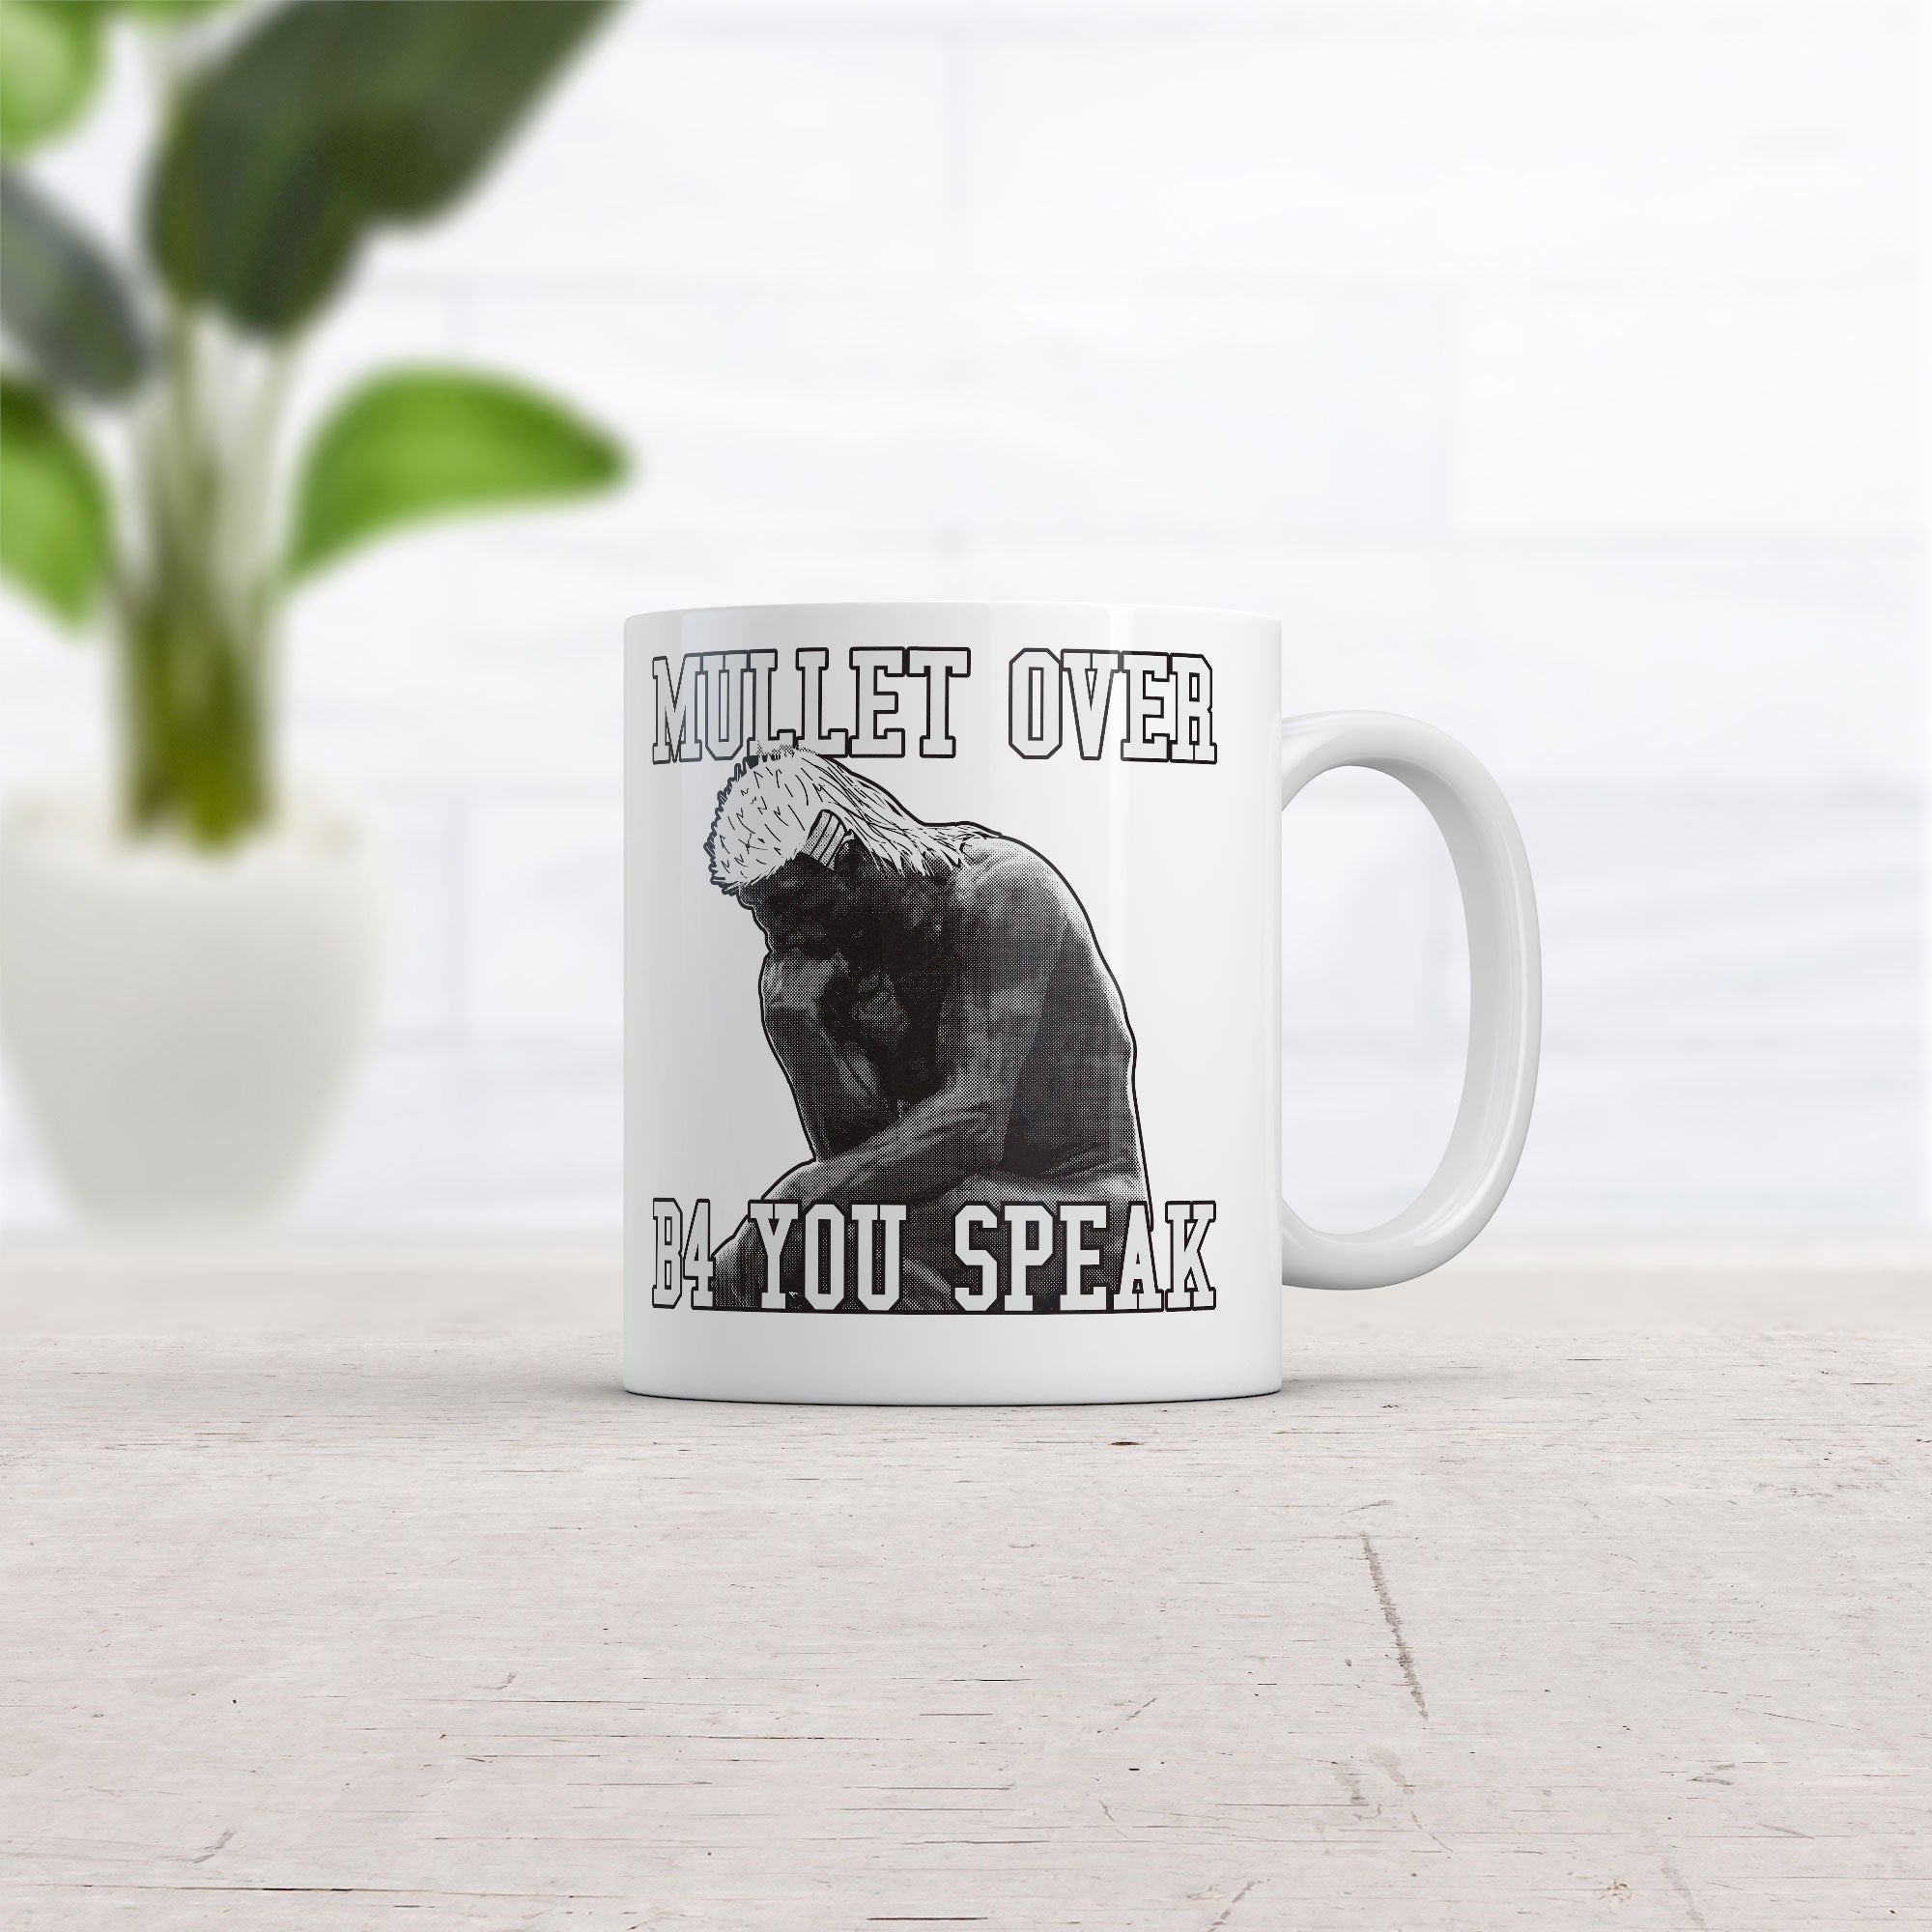 Funny White Mullet Over Before You Speak Coffee Mug Nerdy sarcastic Tee